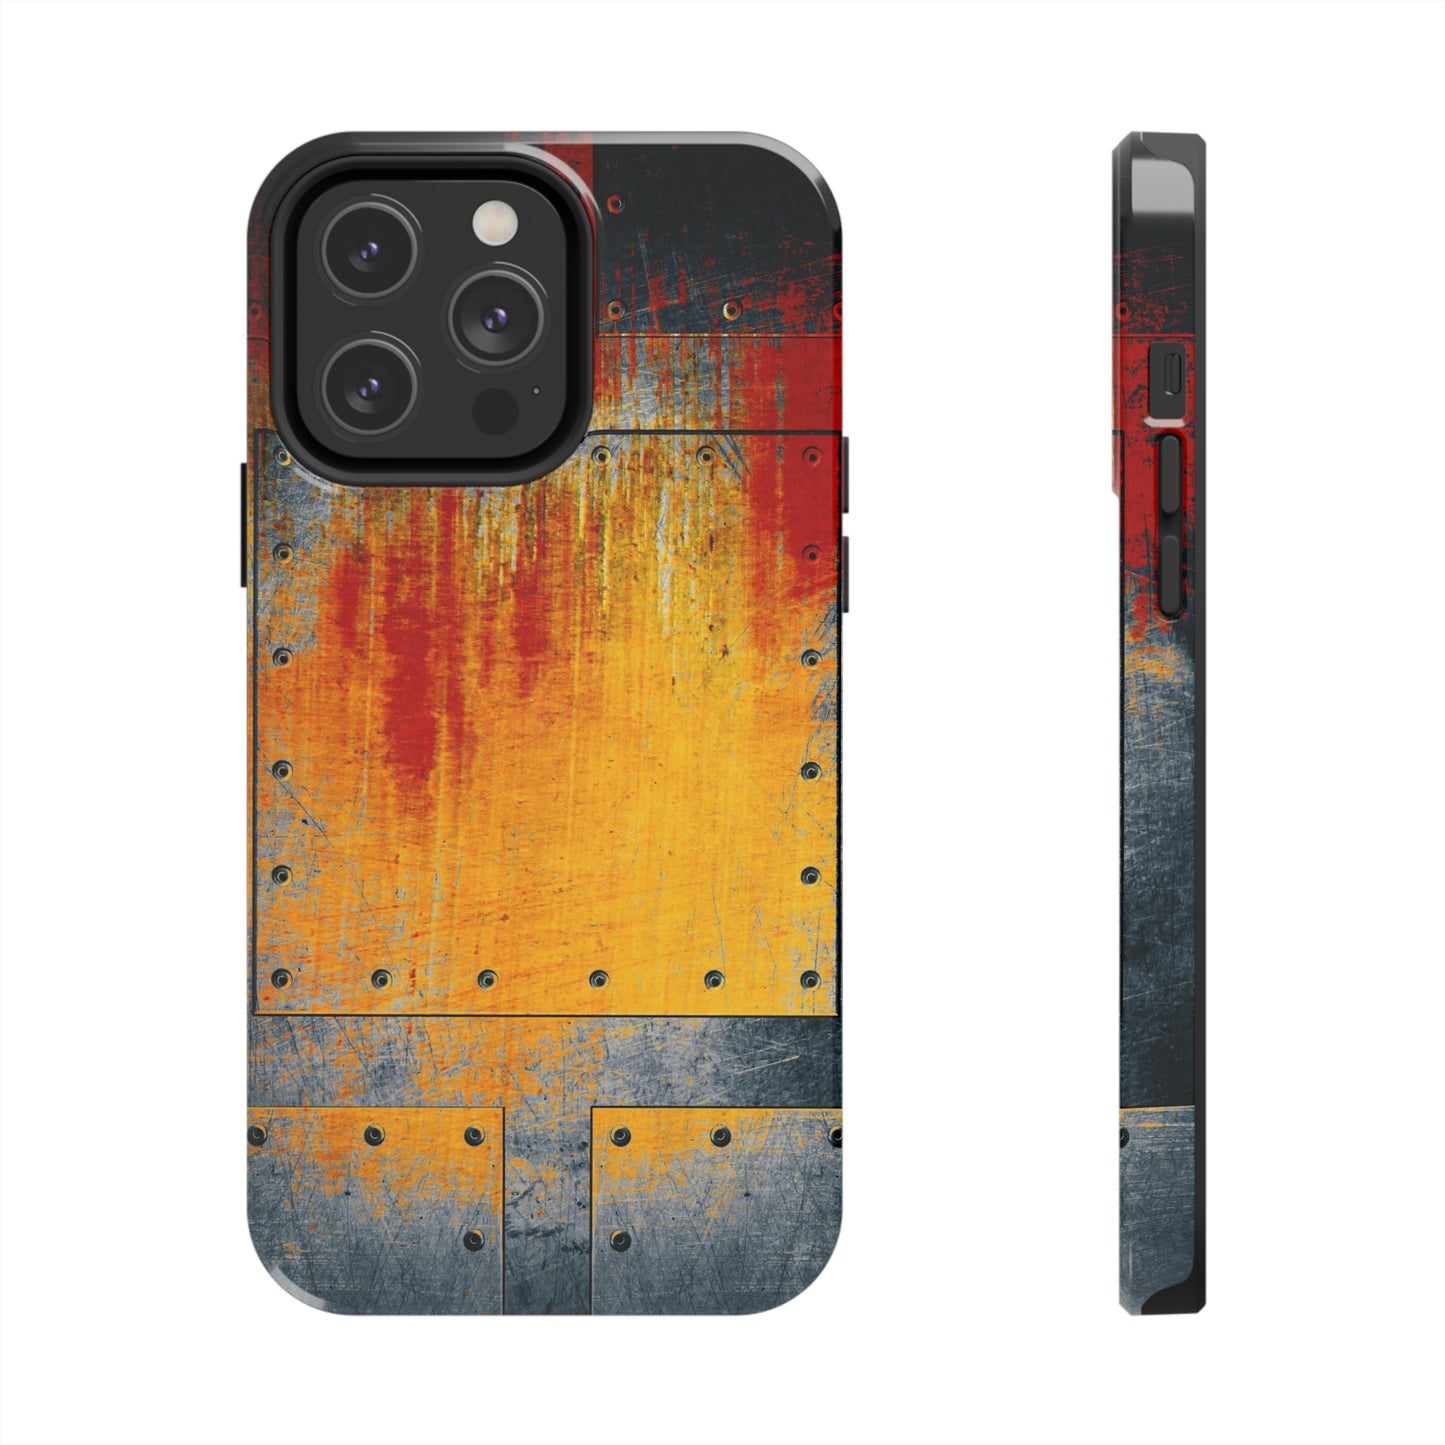 Steampunk Themed Tough Case for iPhone 14 - Rust and Paint on Riveted Metal Plate Print